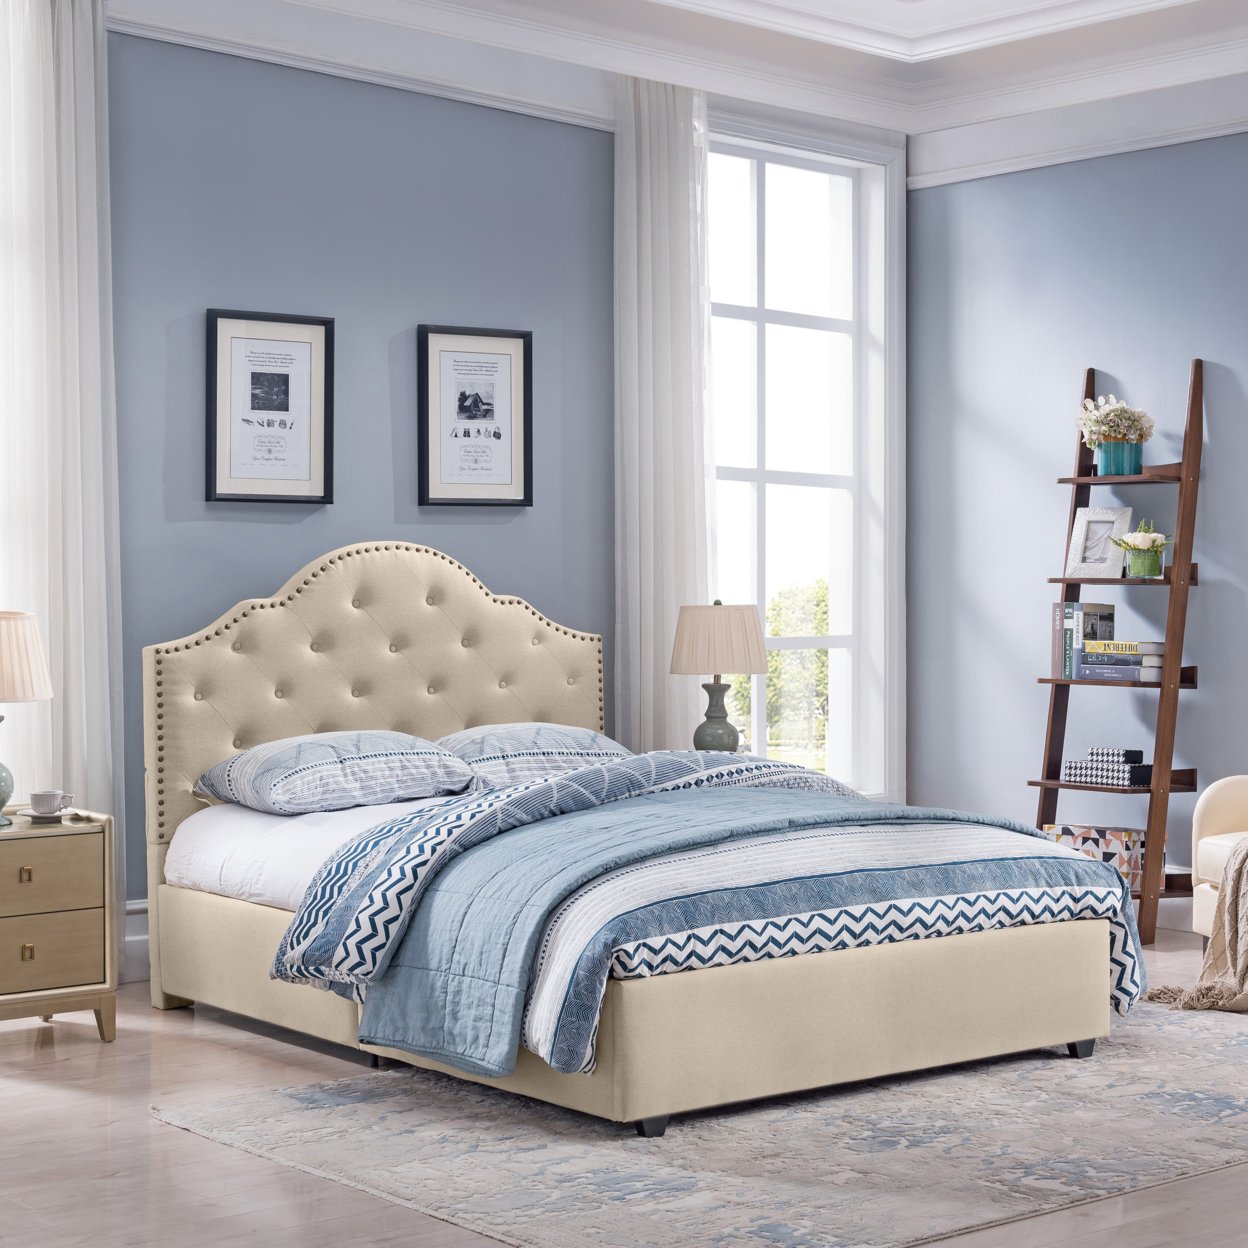 Gentry Contemporary Button-Tufted Upholstered Queen Bed Frame With Nailhead Accents - Navy